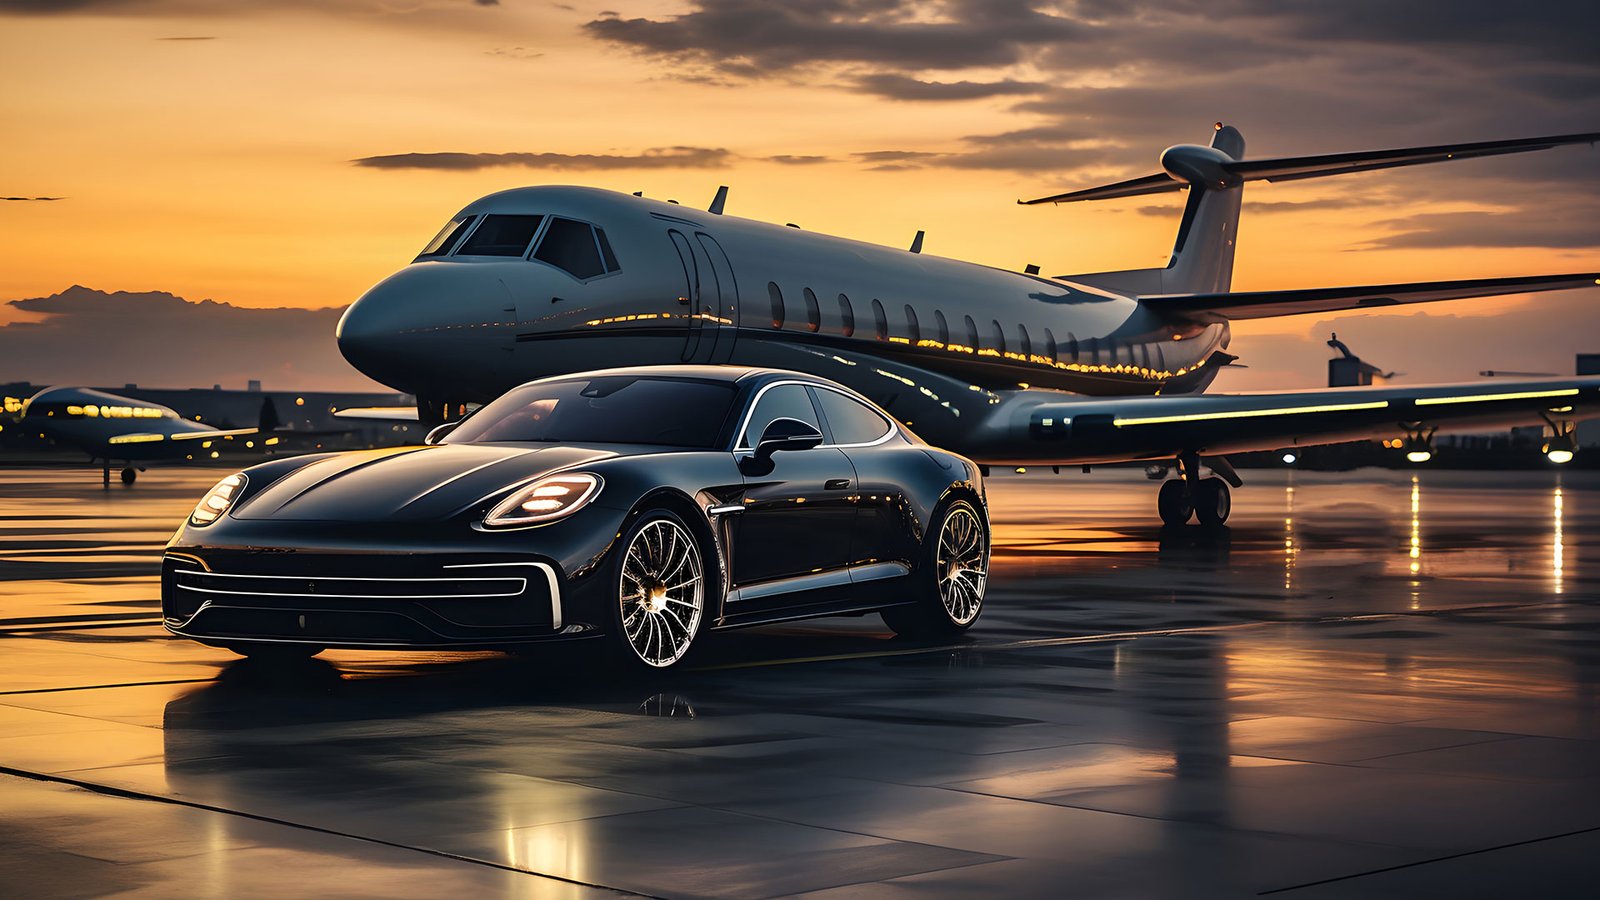 Illustration of a luxury car parked on the side of the runway with a client.